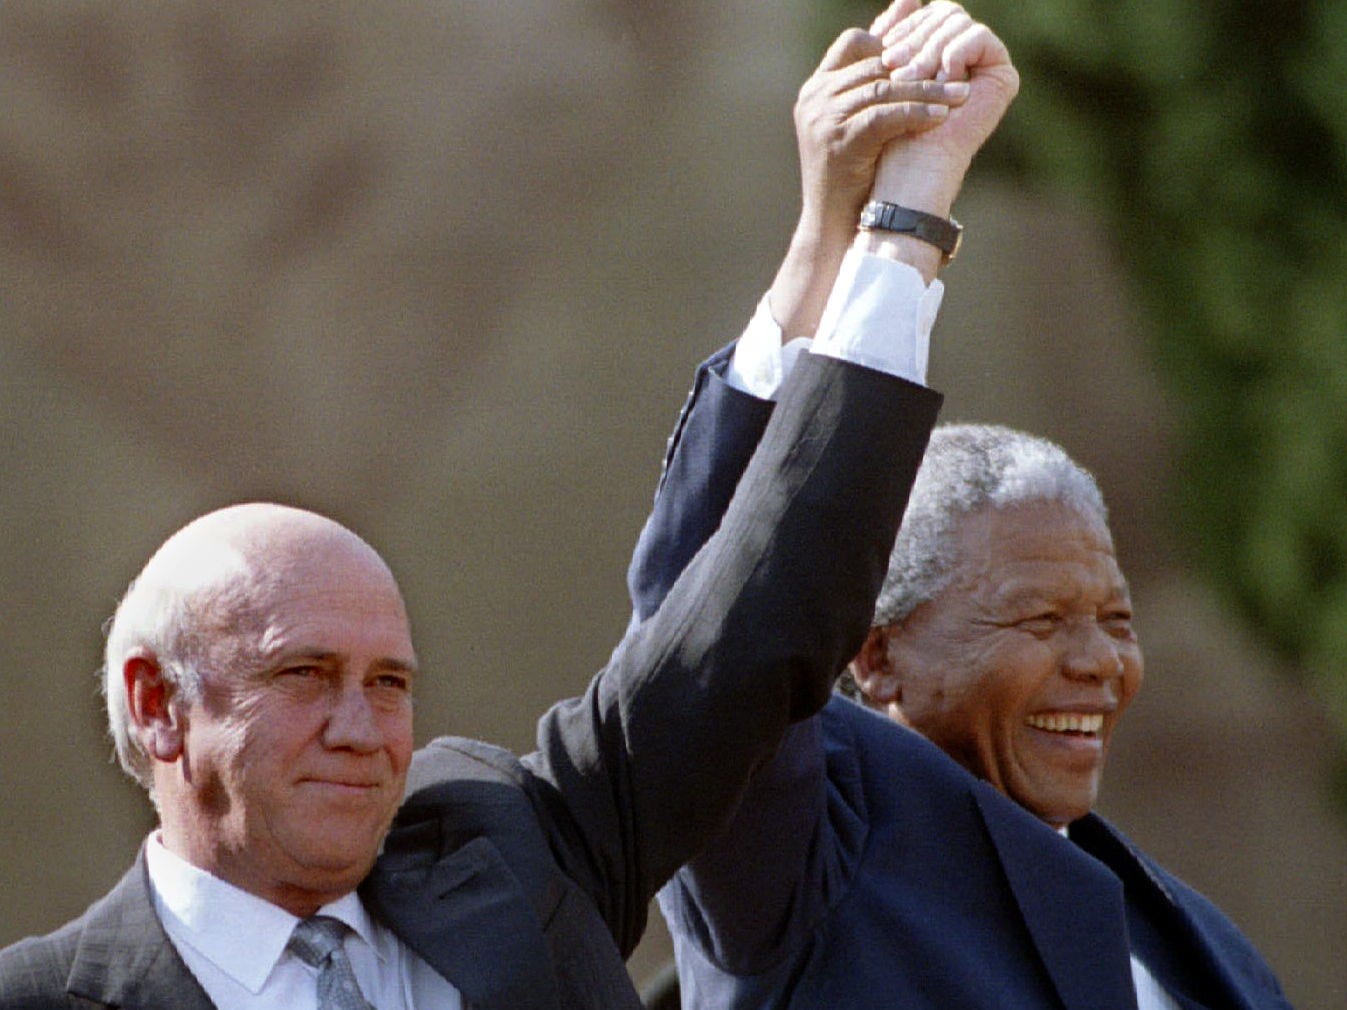 South Africa's First Democratic Elections 1994 | Teaching Resources